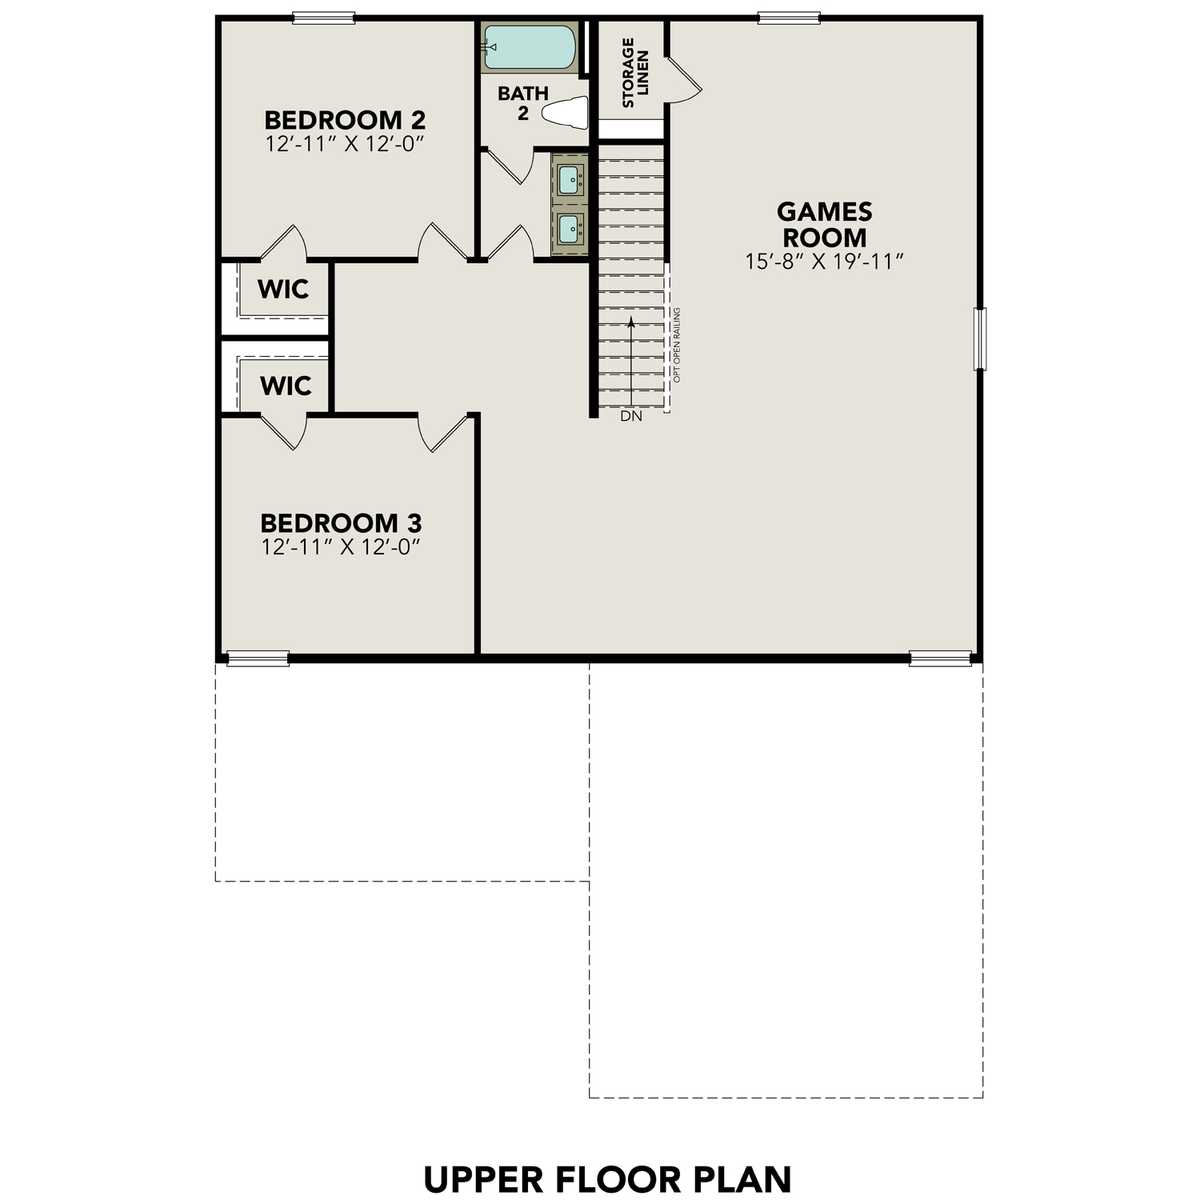 2 - The Douglas D floor plan layout for 208 Drew Circle in Davidson Homes' Hannah Heights community.